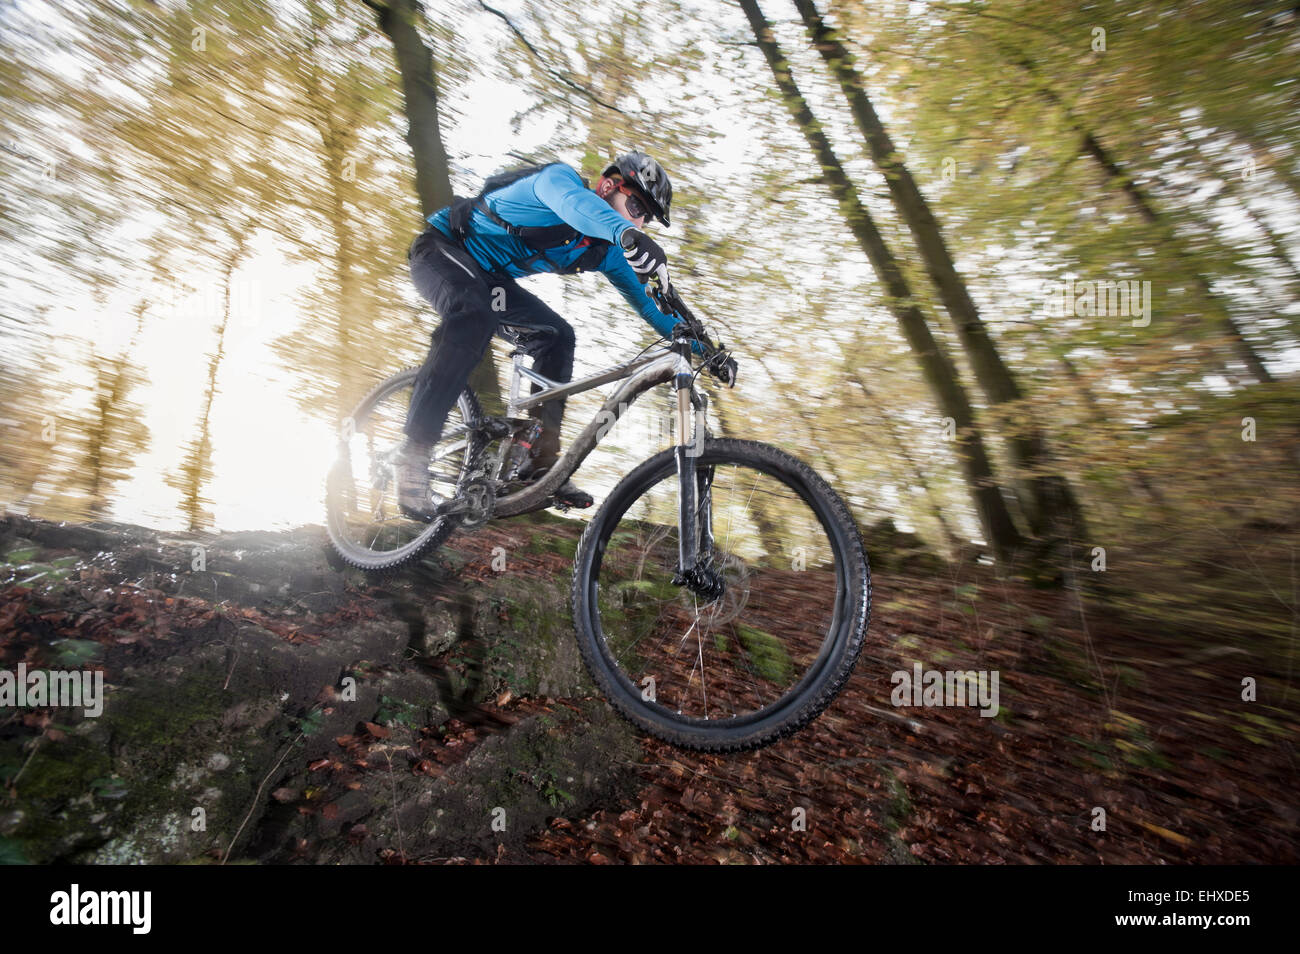 Mountain biker riding downhill in a forest, Bavaria, Germany Stock Photo